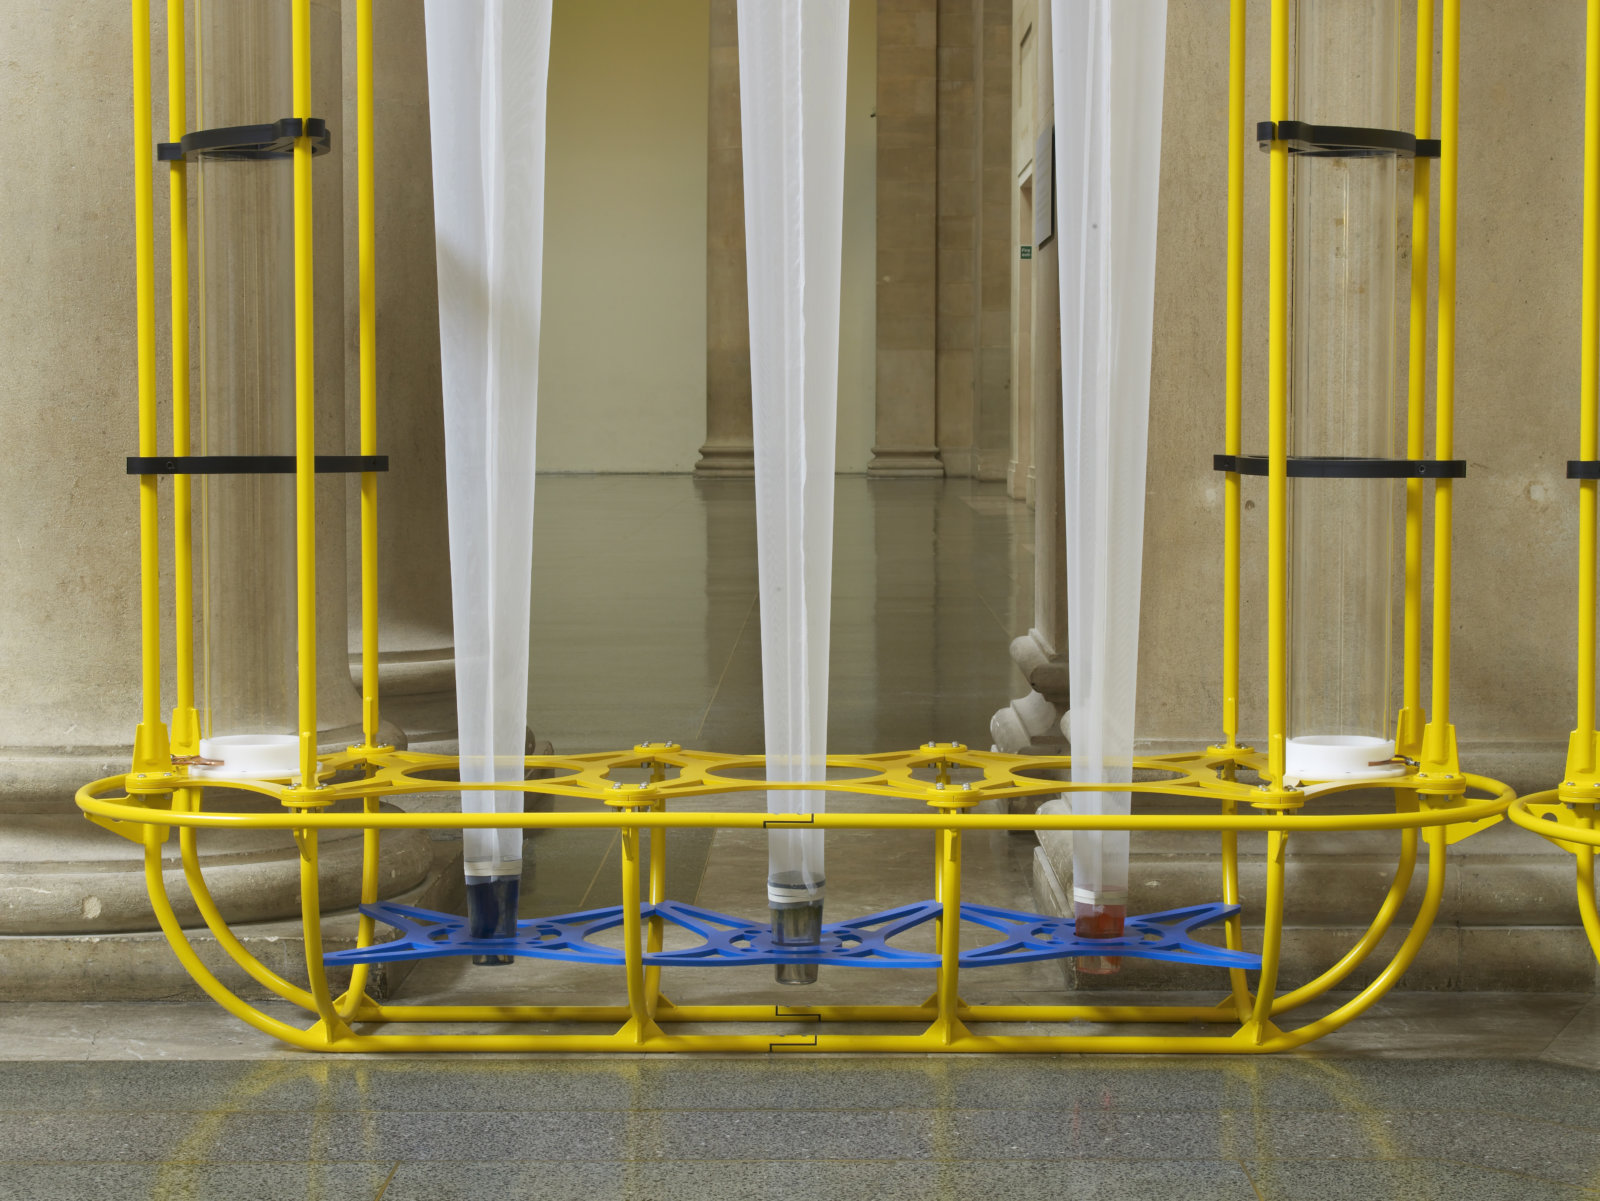 Christina Mackie, The Yellow Machines (detail), 2015, steel, aluminum, acrylic, styrene, copper, stainless steel, nylon webbing, polyethylene, nylon, resin, rubber, 128 x 160 x 32 in. (326 x 406 x 80 cm). Installation view, the filters, Tate Britain, London, UK, 2015